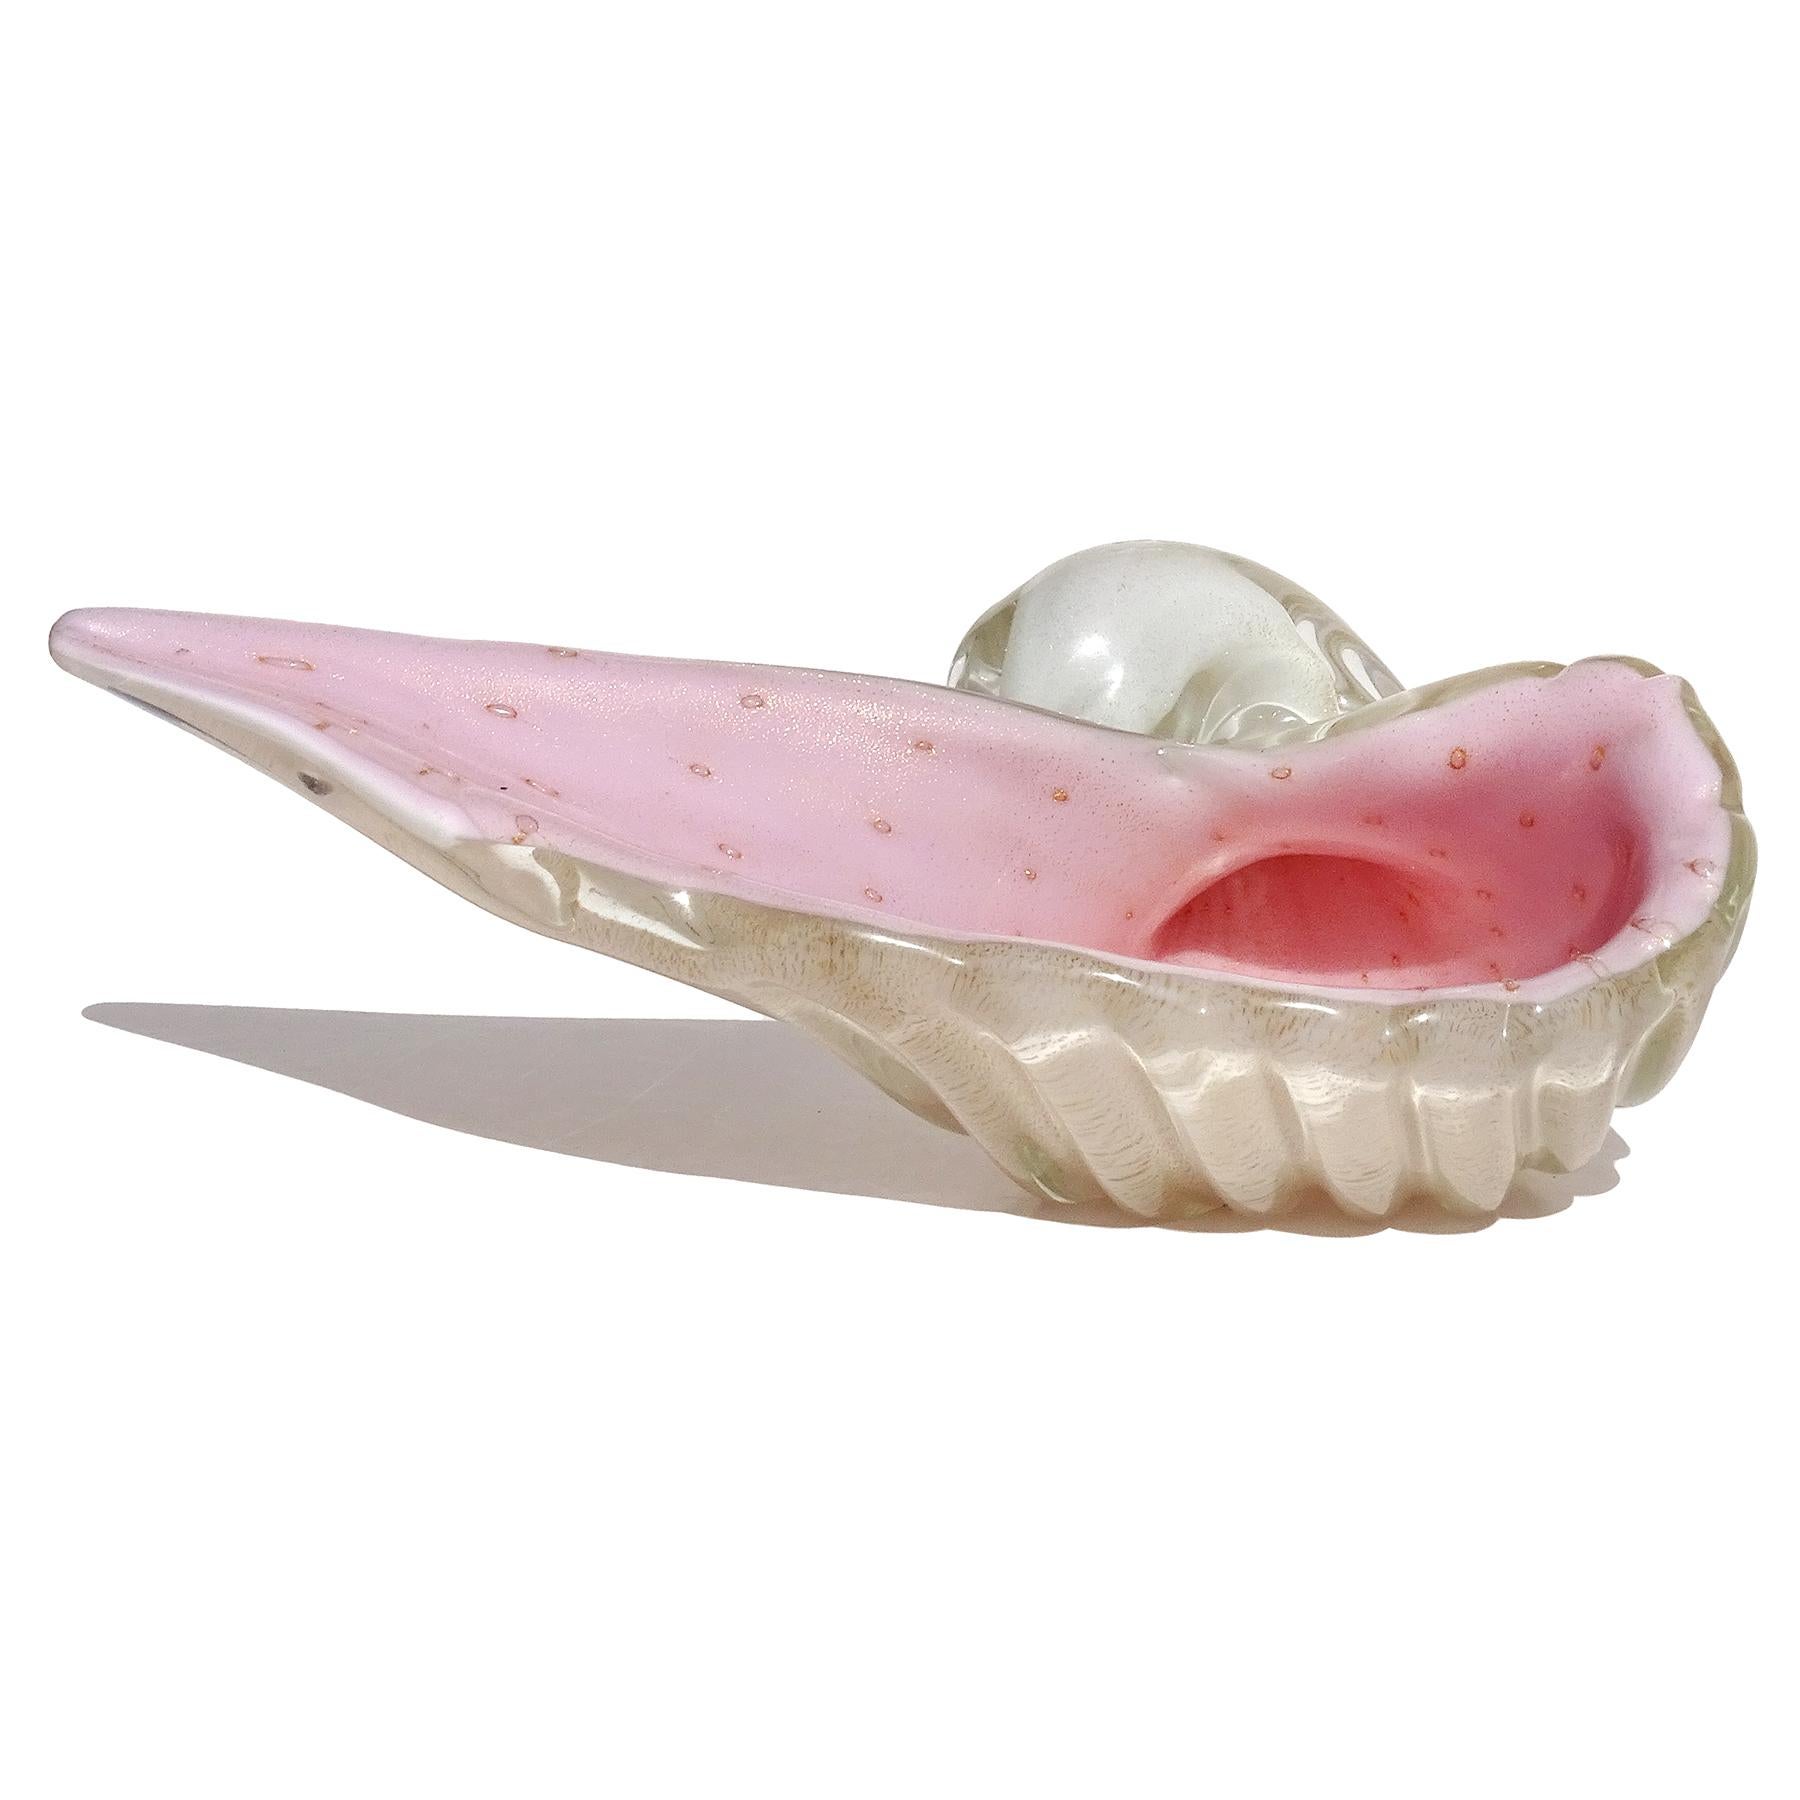 Beautiful vintage Murano hand blown pink, white, gold flecks and controlled bubbles Italian art glass sculptural seashell bowl. Documented to designer Alfredo Barbini. The piece has a white outer layer that is covered in gold leaf, with the inside